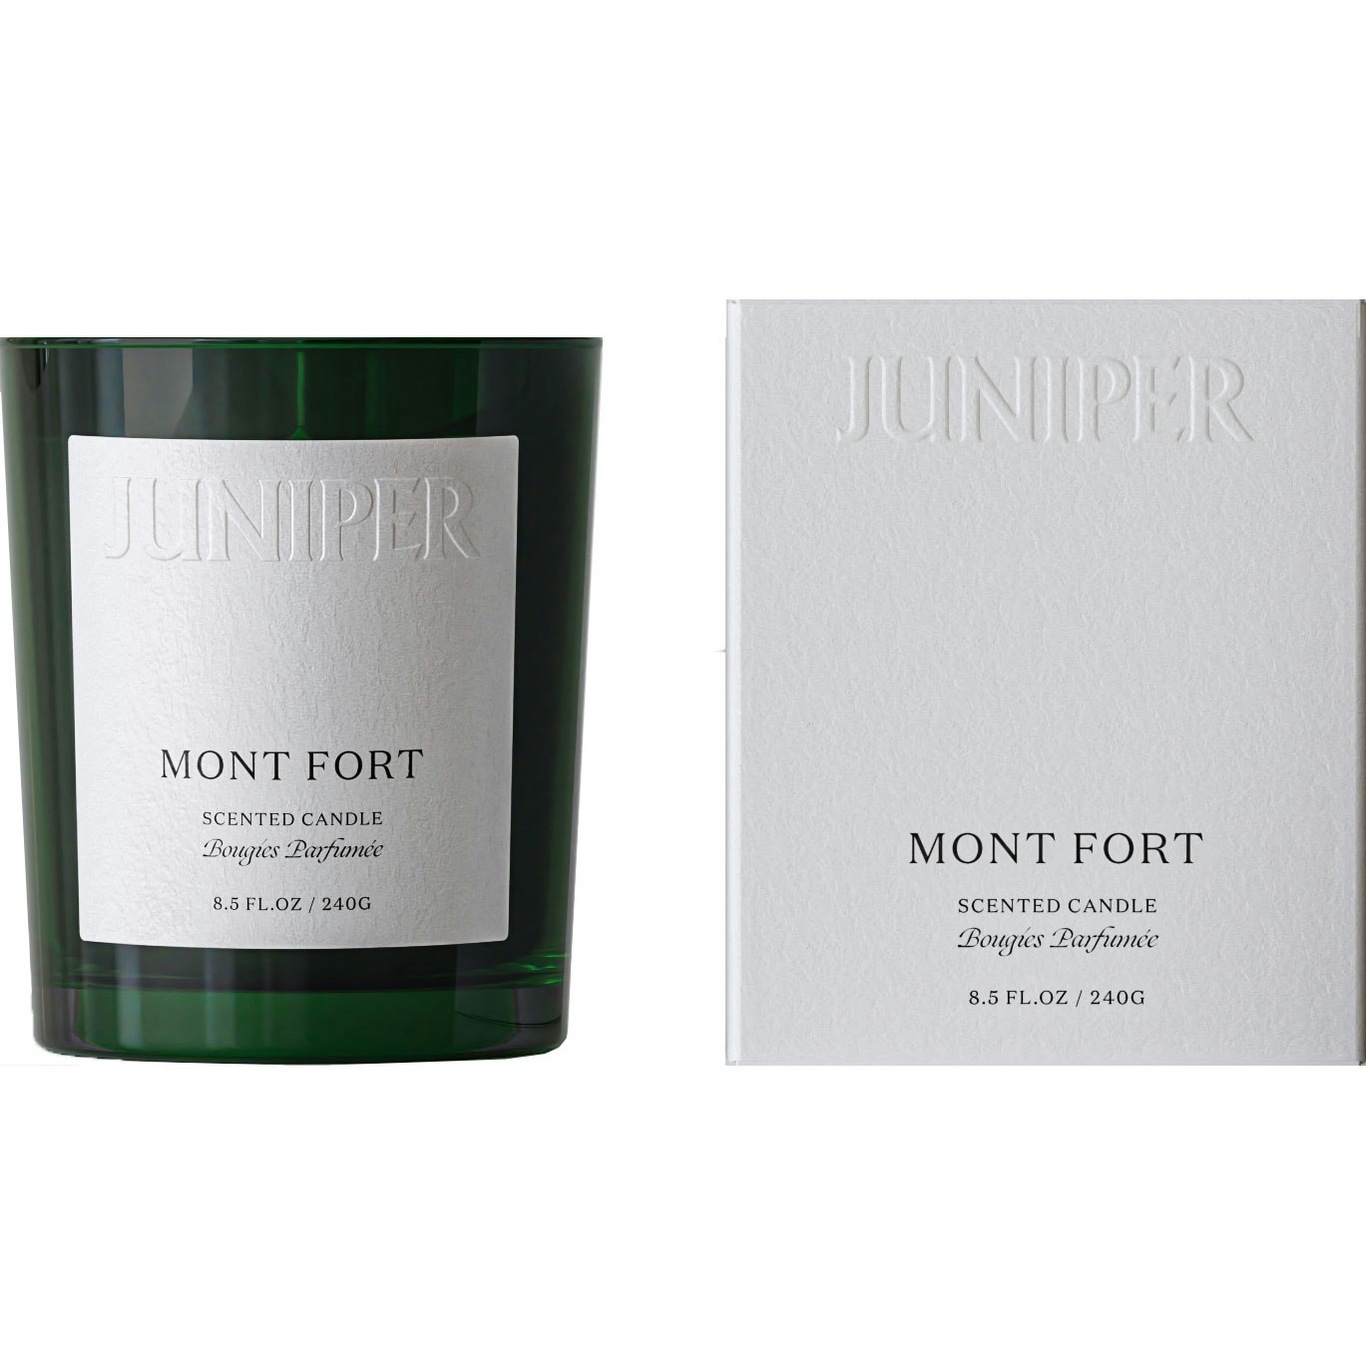 Mont Fort Scented Candle